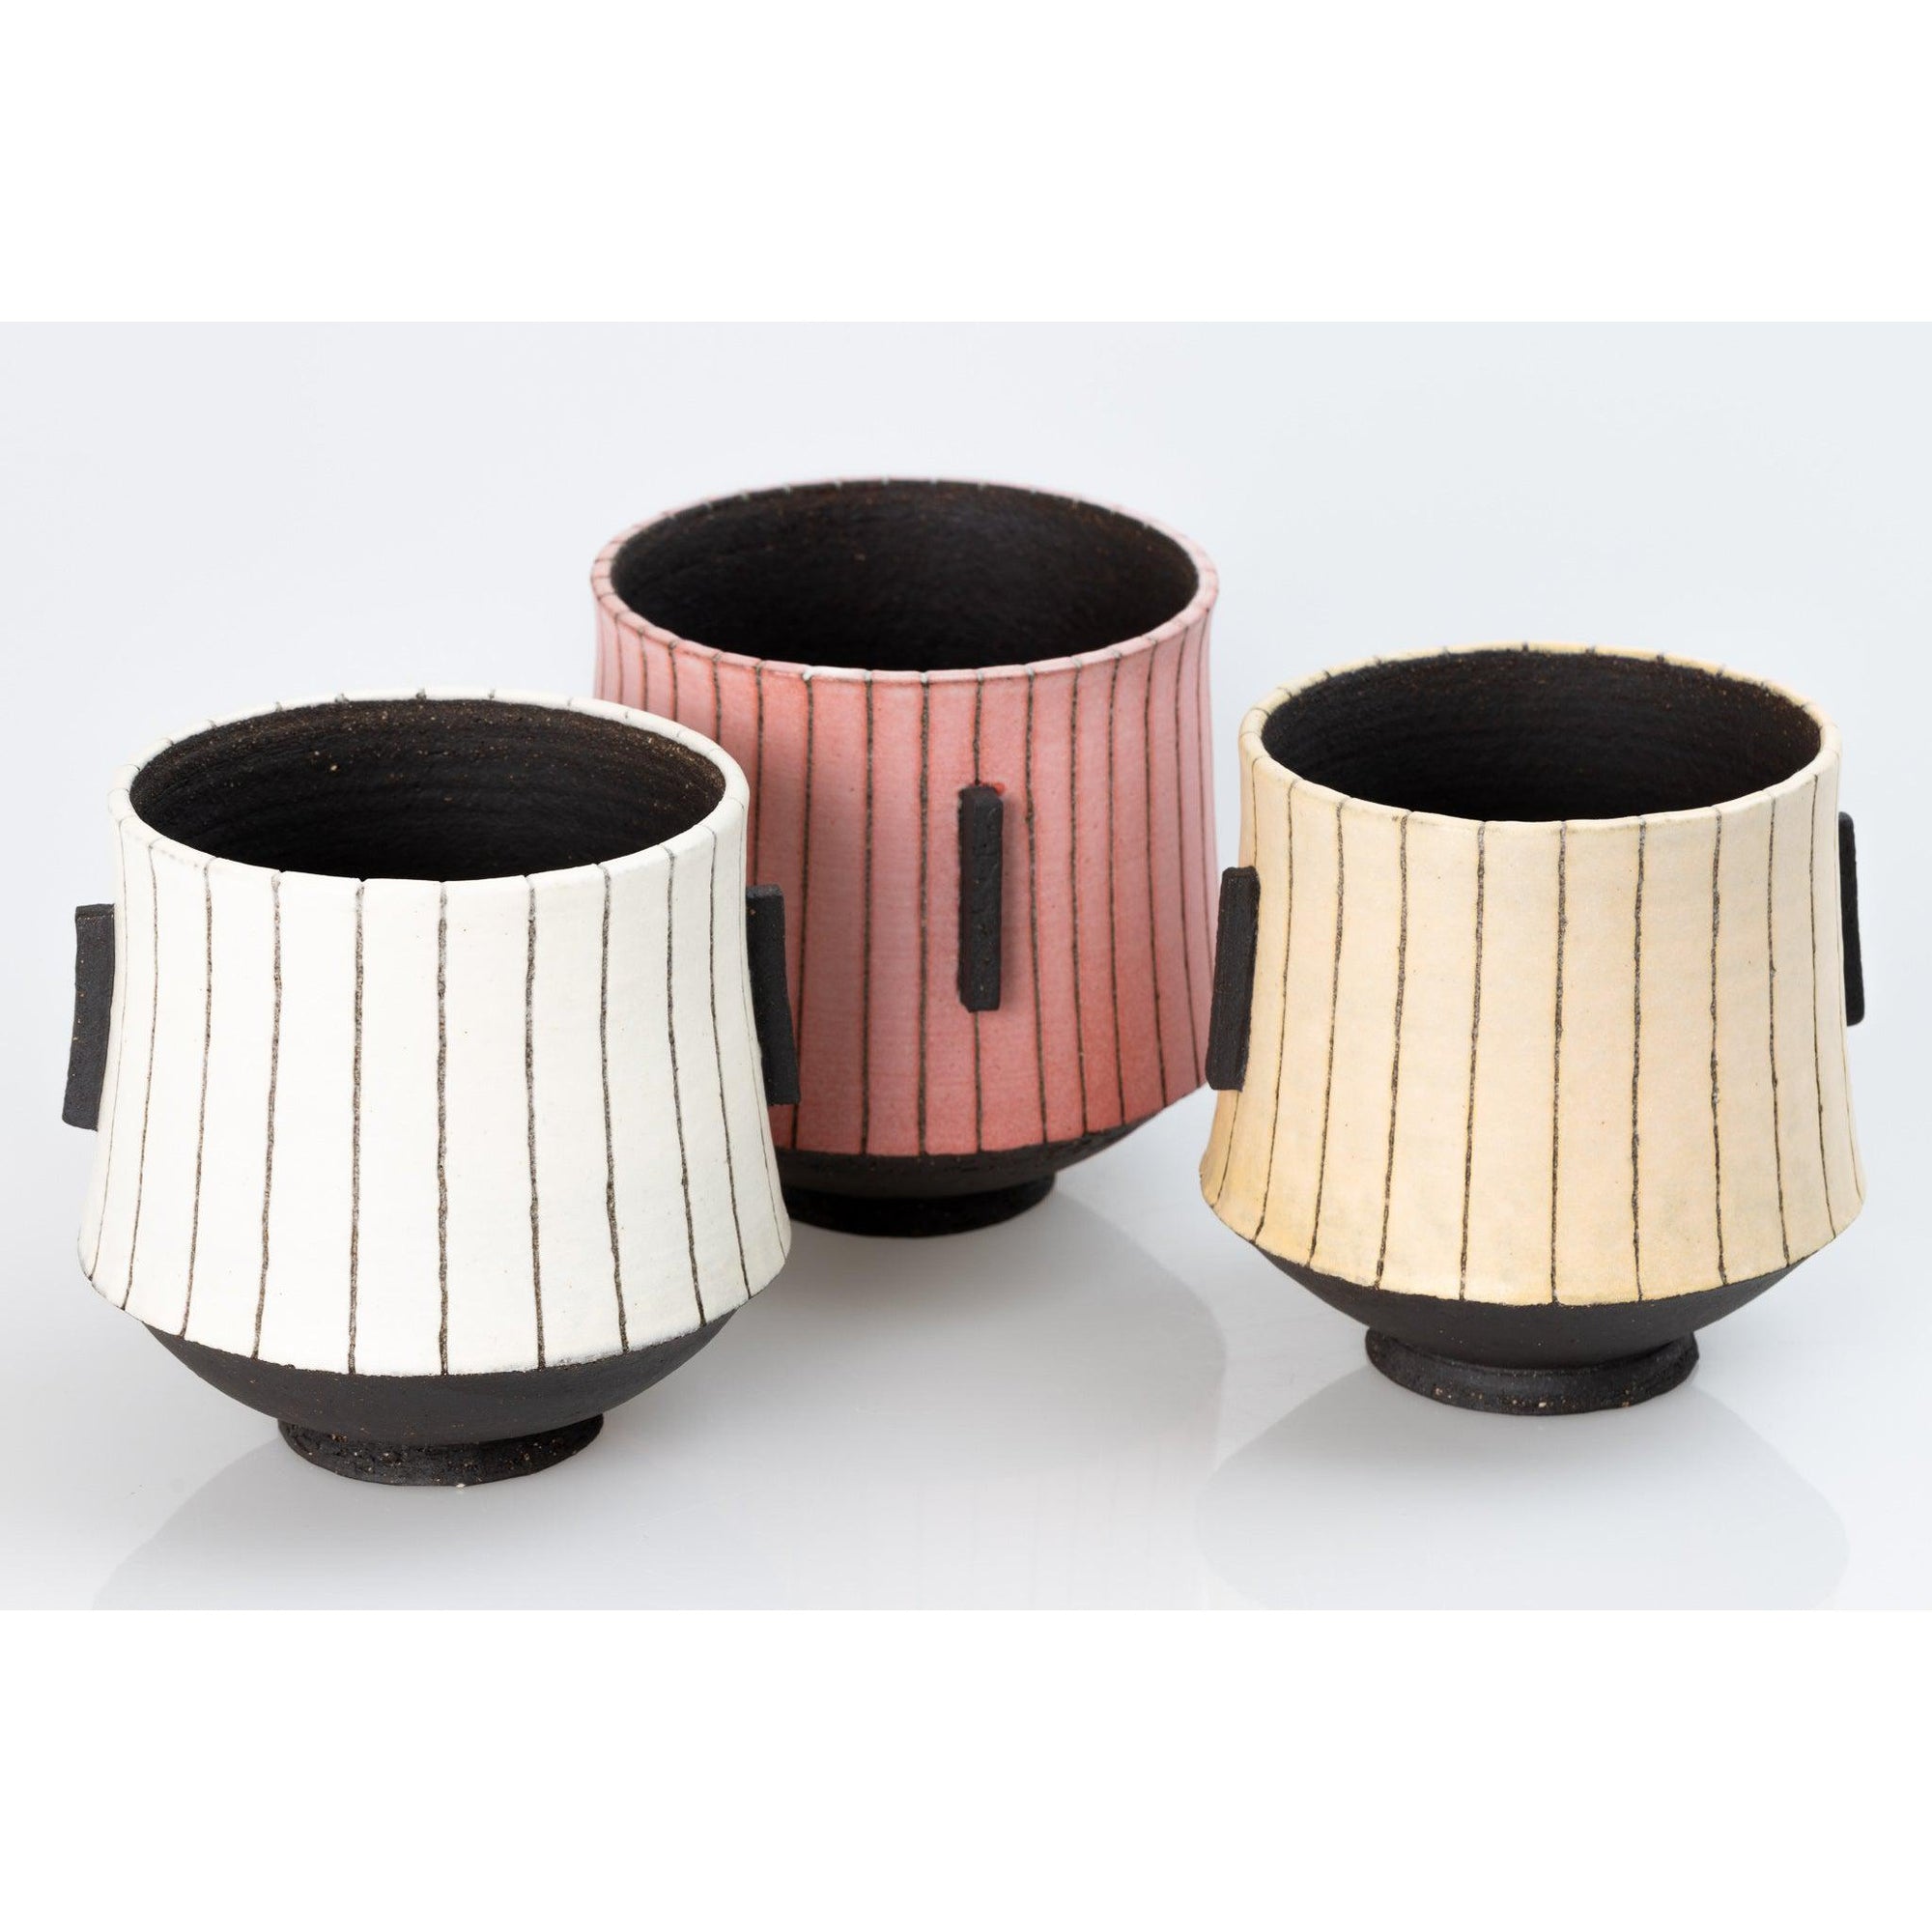 'AP39 Black Stripy Vessel - Amber' by Ania Perkowska, available at Padstow Gallery, Cornwall